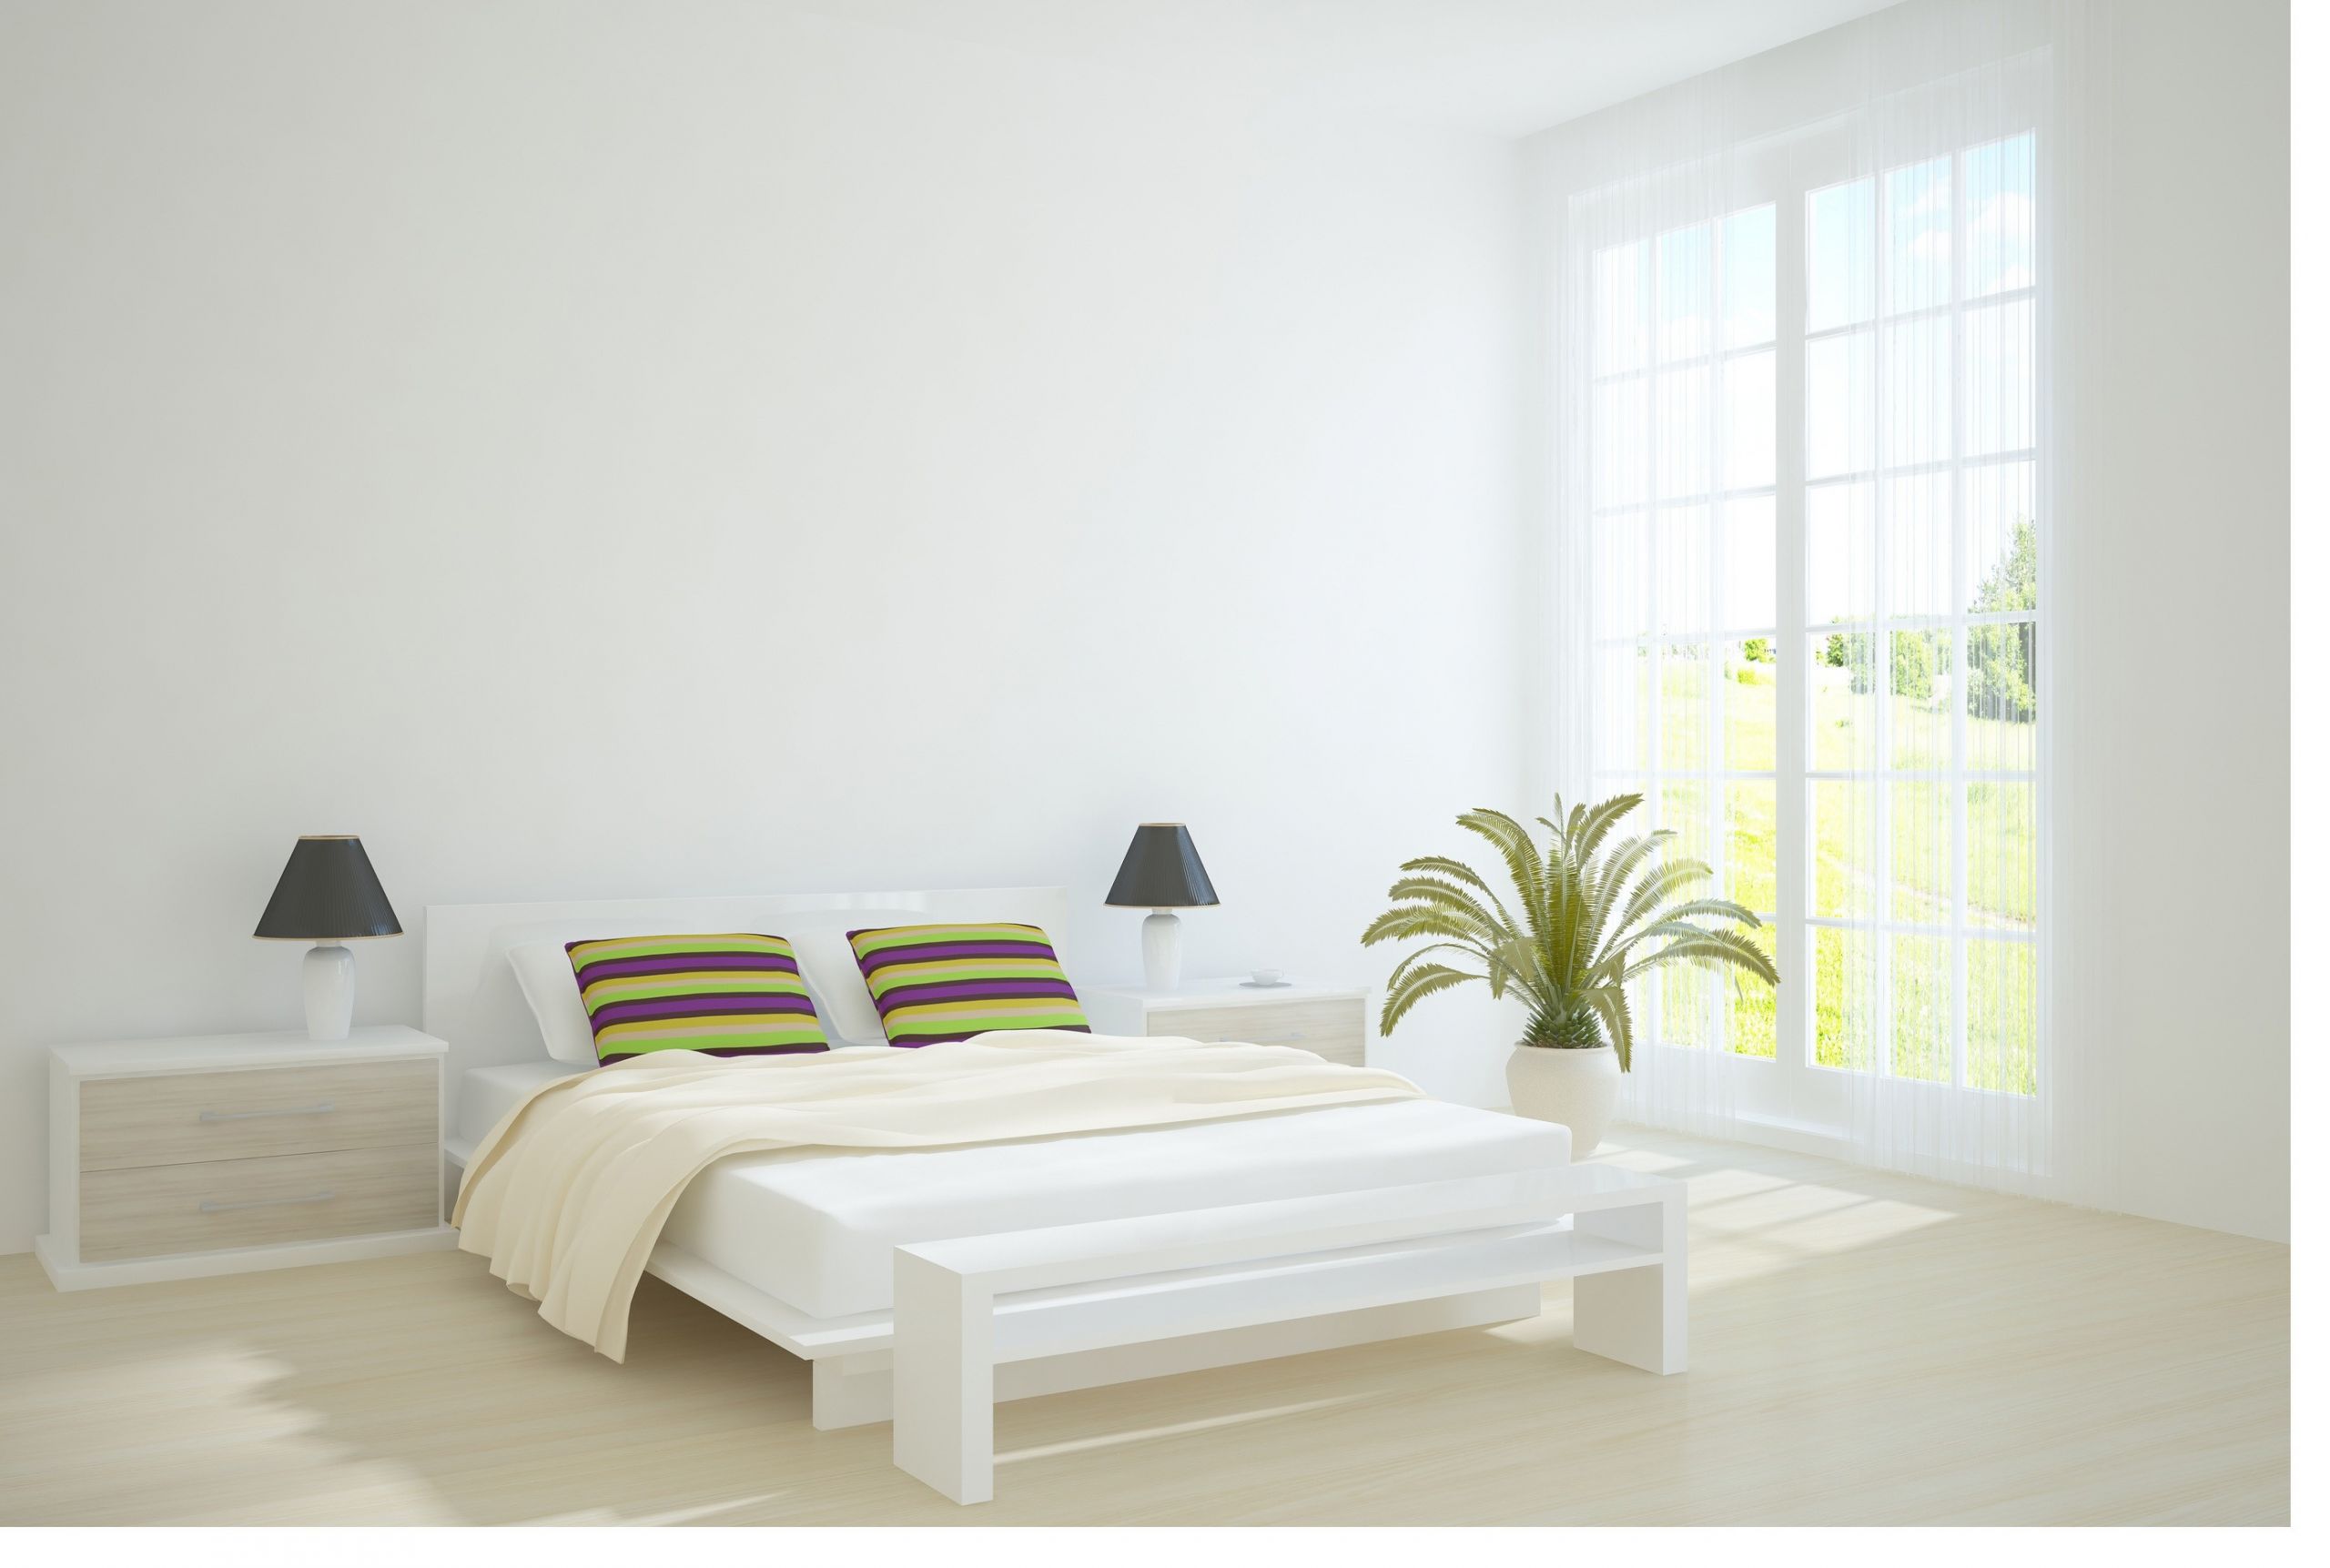 White Bedroom Decorating Ideas
 21 Must See White Bedroom Ideas for 2014 Qnud